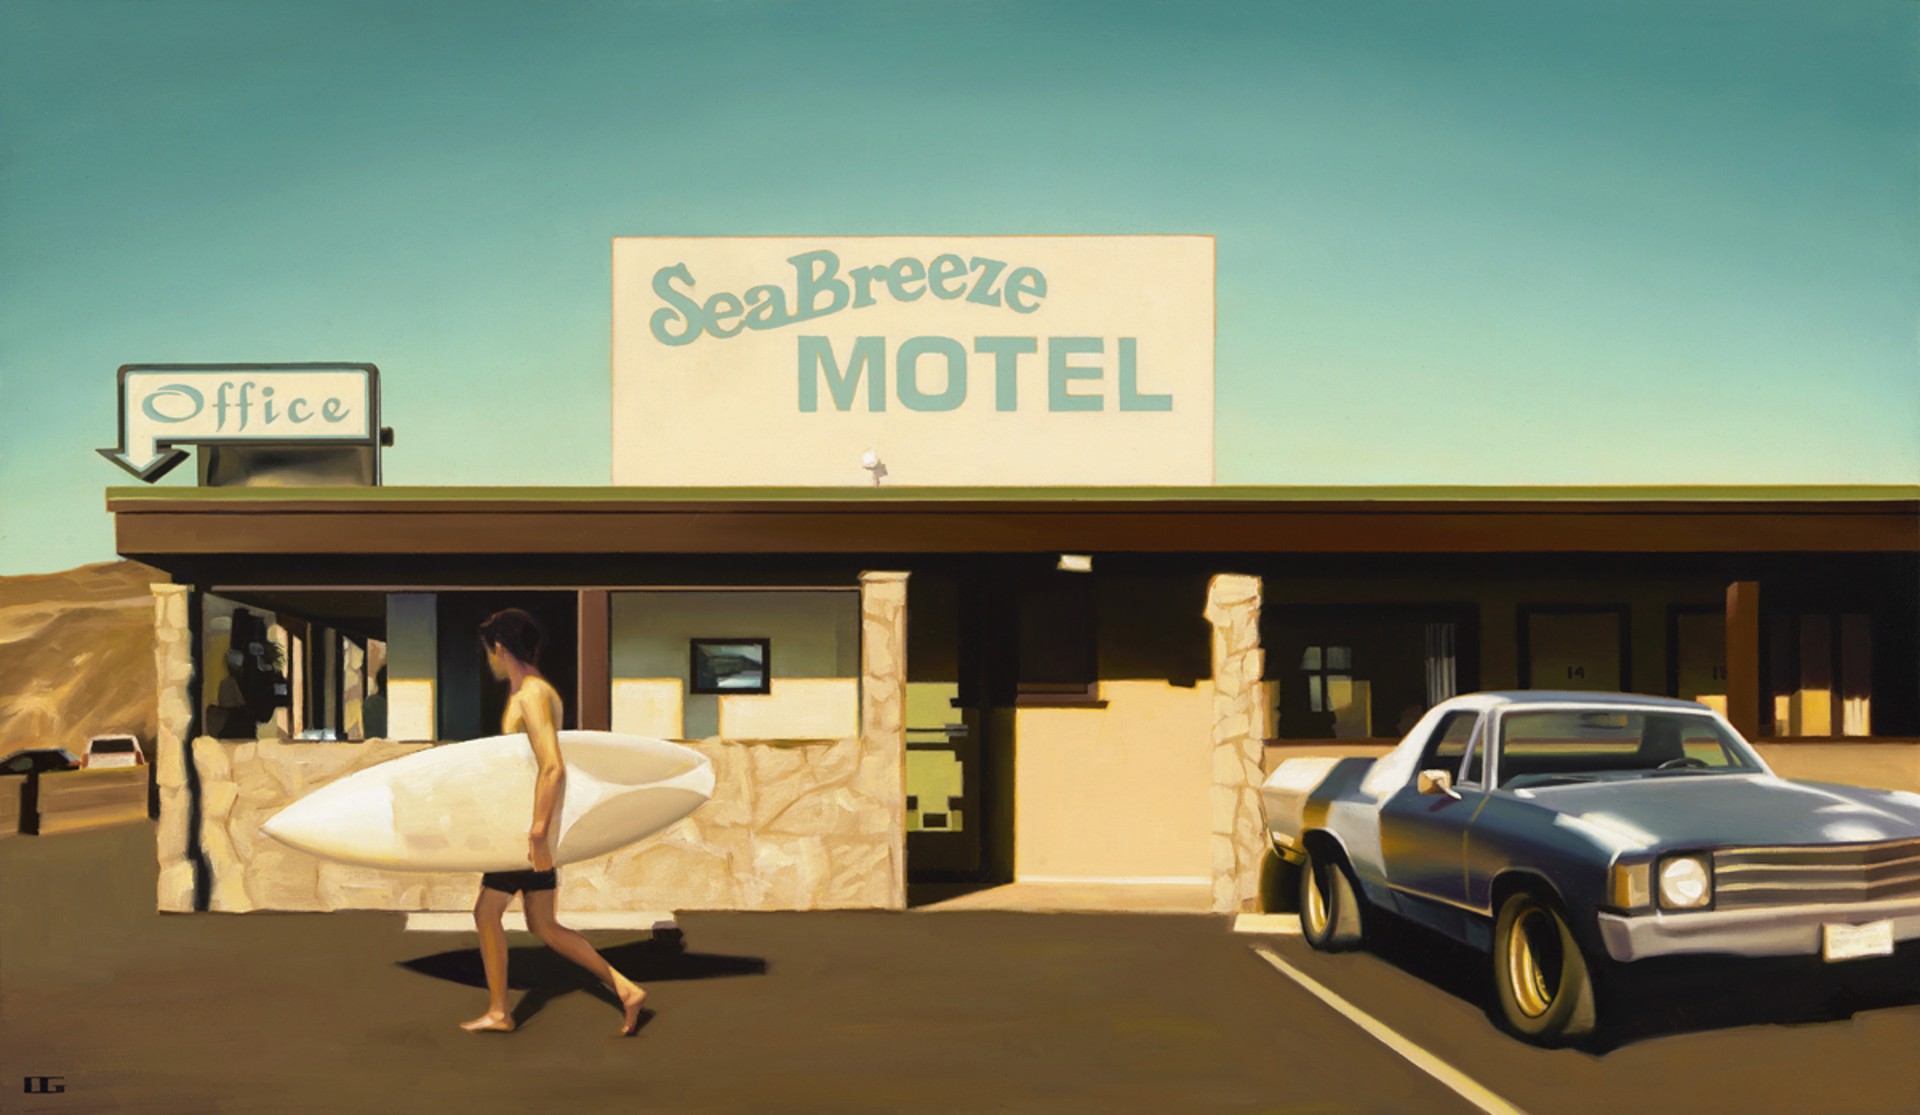 Sea Breeze Motel by Carrie Graber